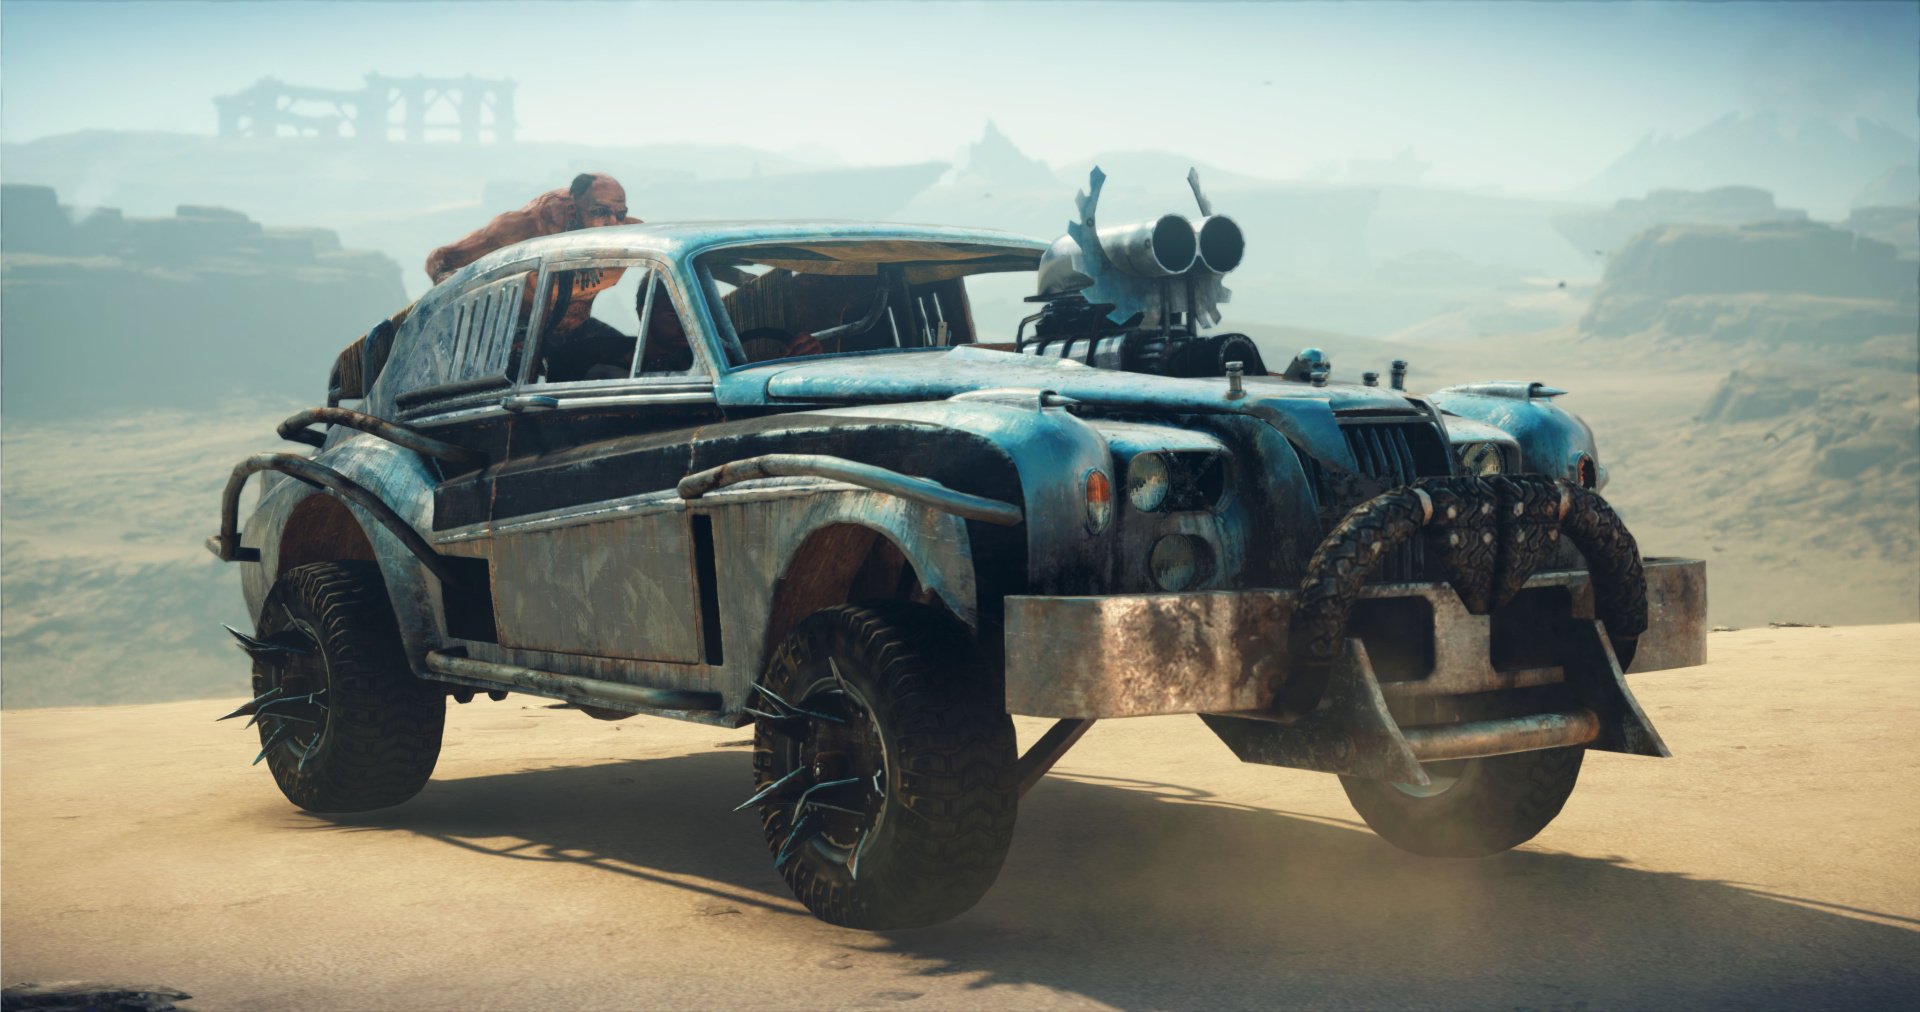 mad max ps4